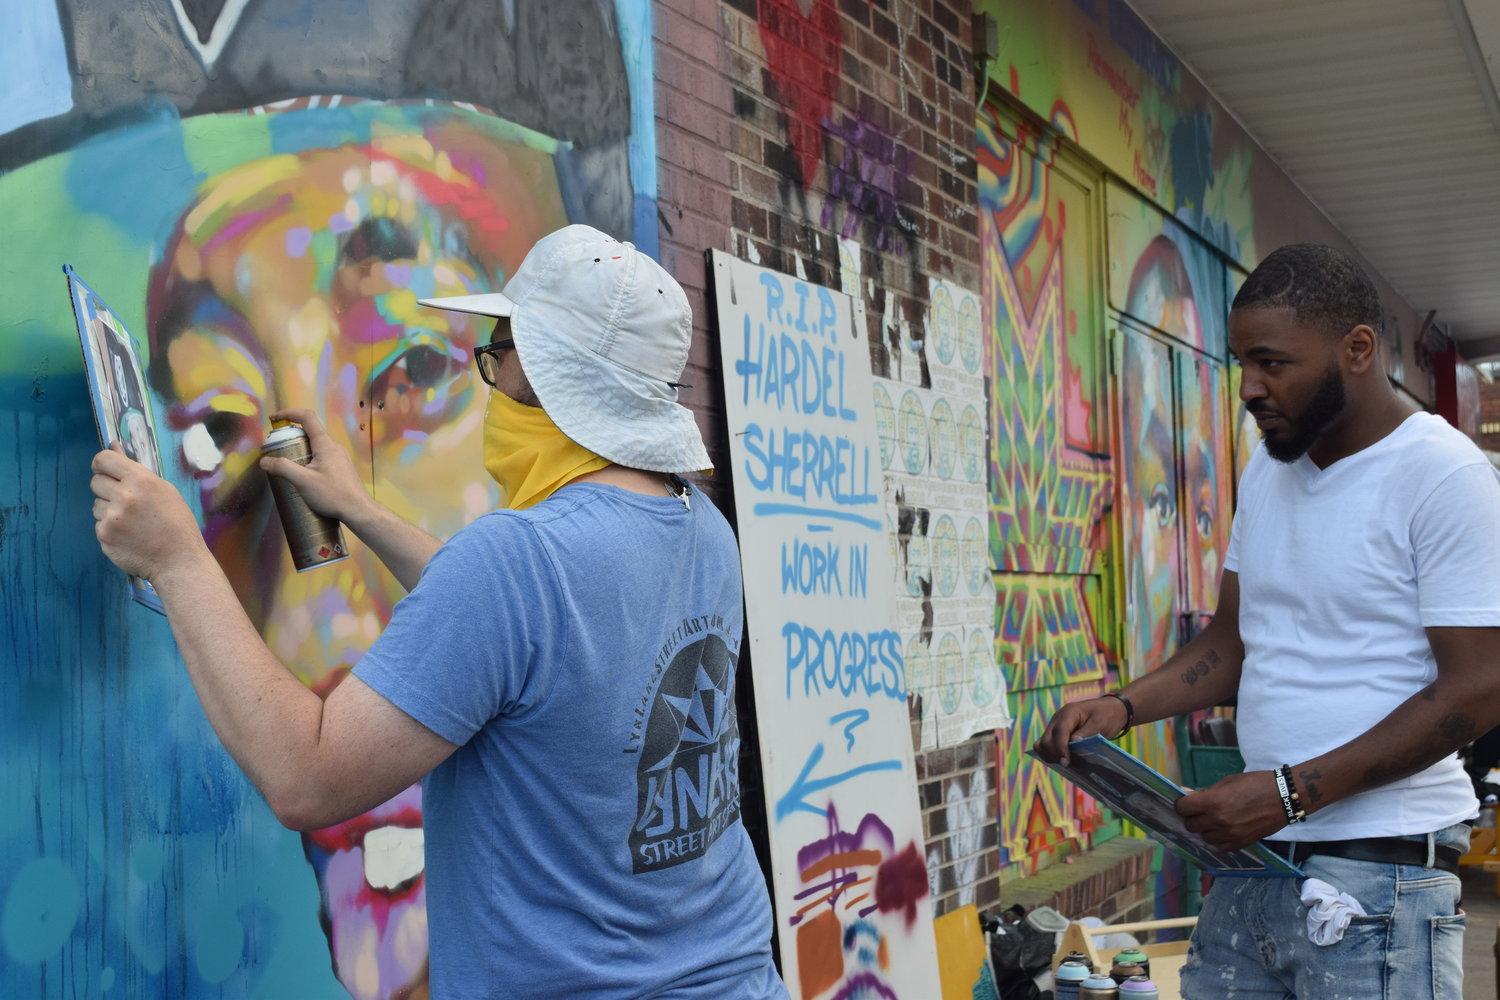 Artists Popeye (wearing white shirt) and Wes Winship put the finishing touches on a mural of Hardel Sherrell, who died while in custody at the Beltrami County Jail. The mural was completed and presented to Sherrell’s mom, Del Shea Perry, at the Rise & Remember event on May 25.